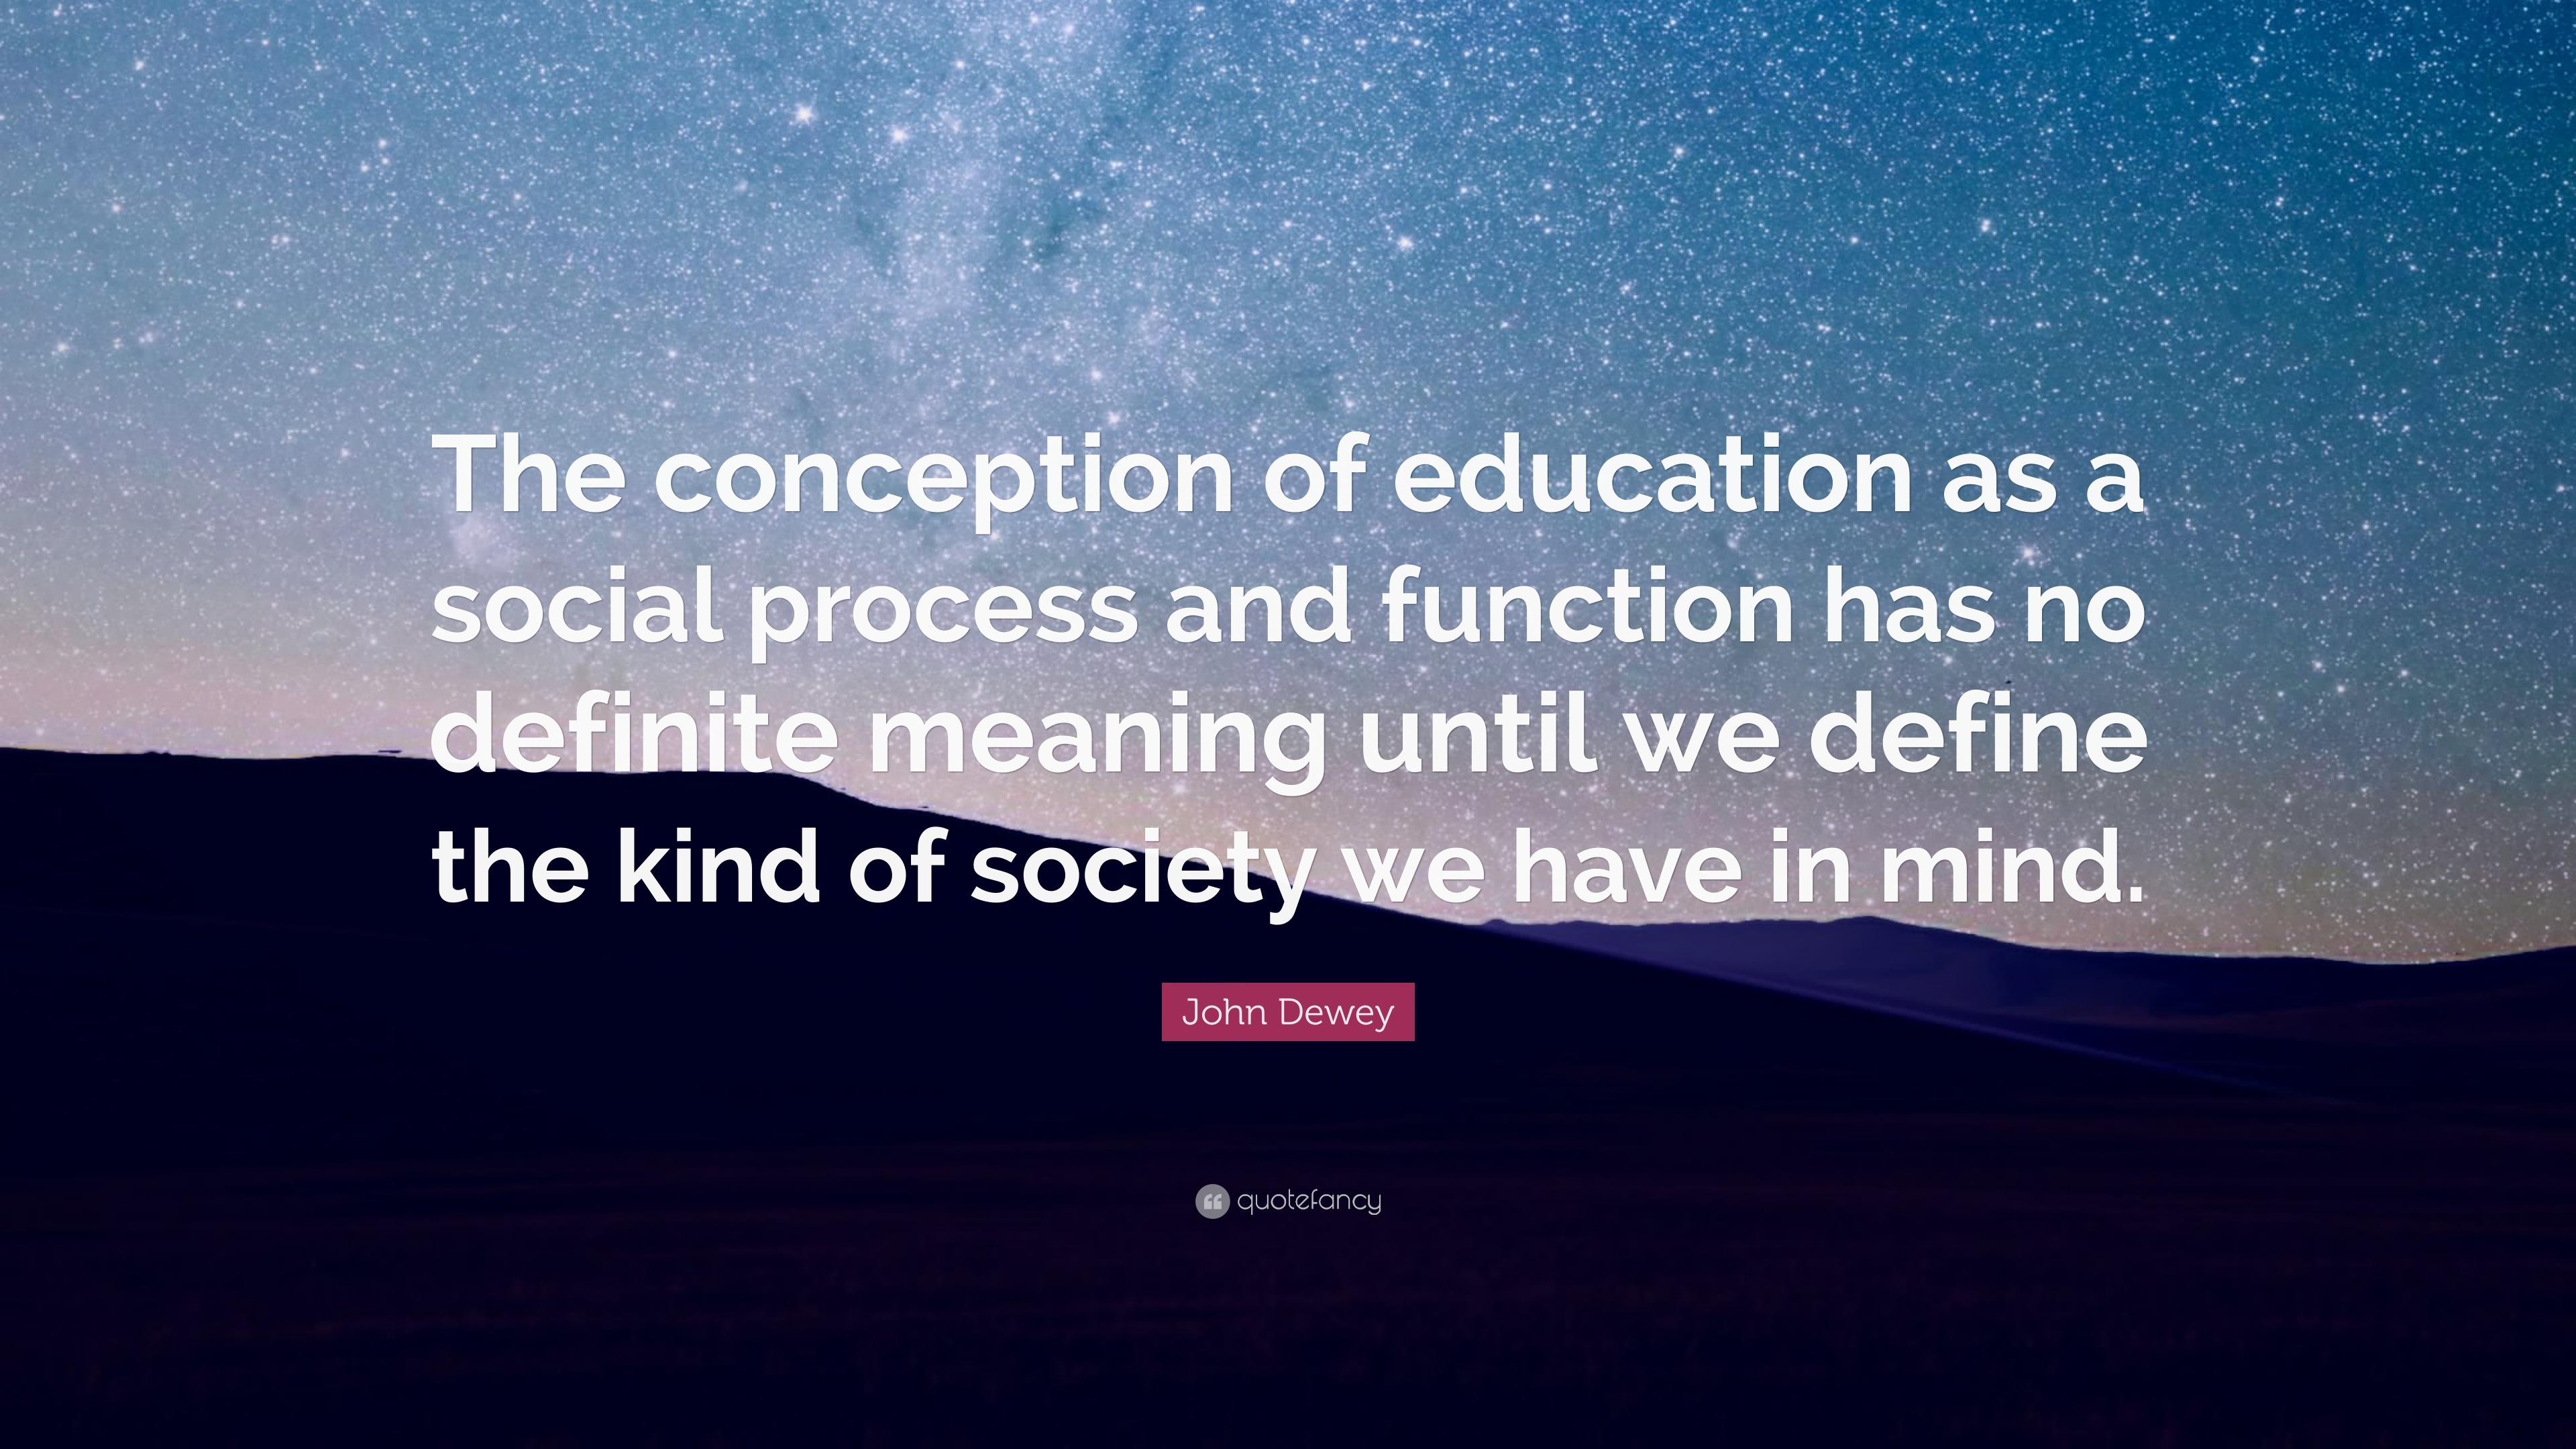 education is a social process meaning